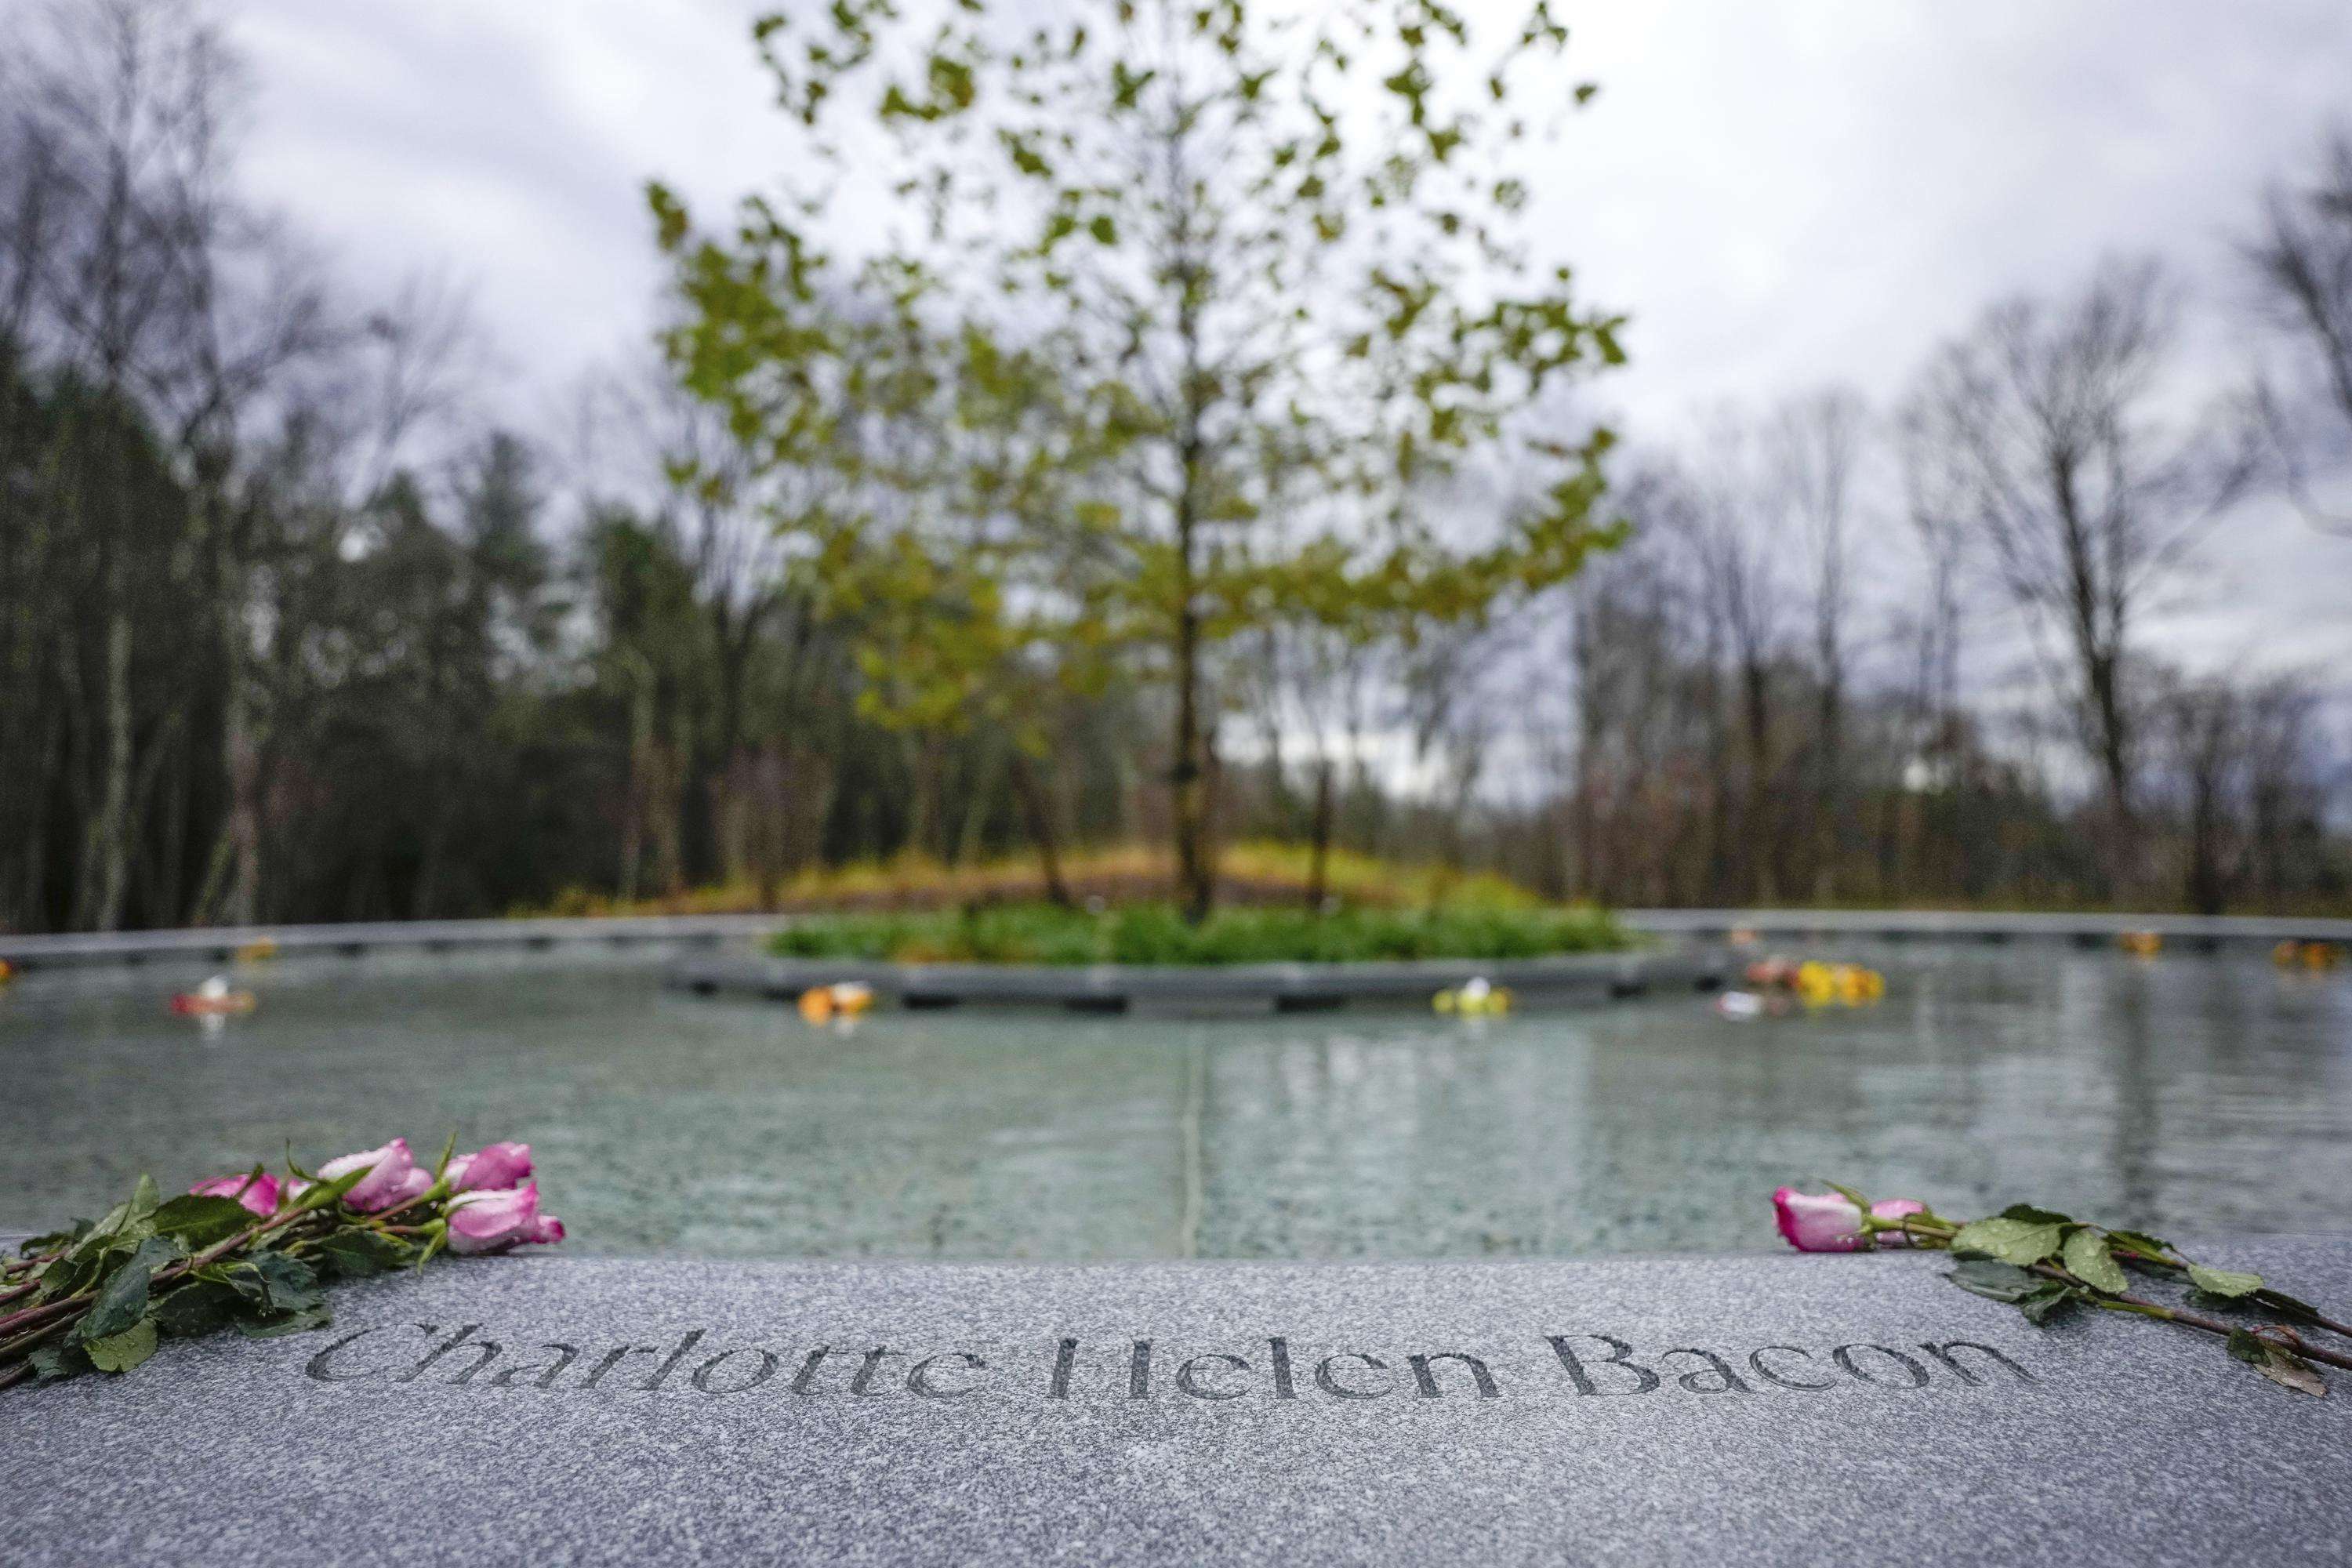 image for Sandy Hook memorial opens nearly 10 years after 26 killed